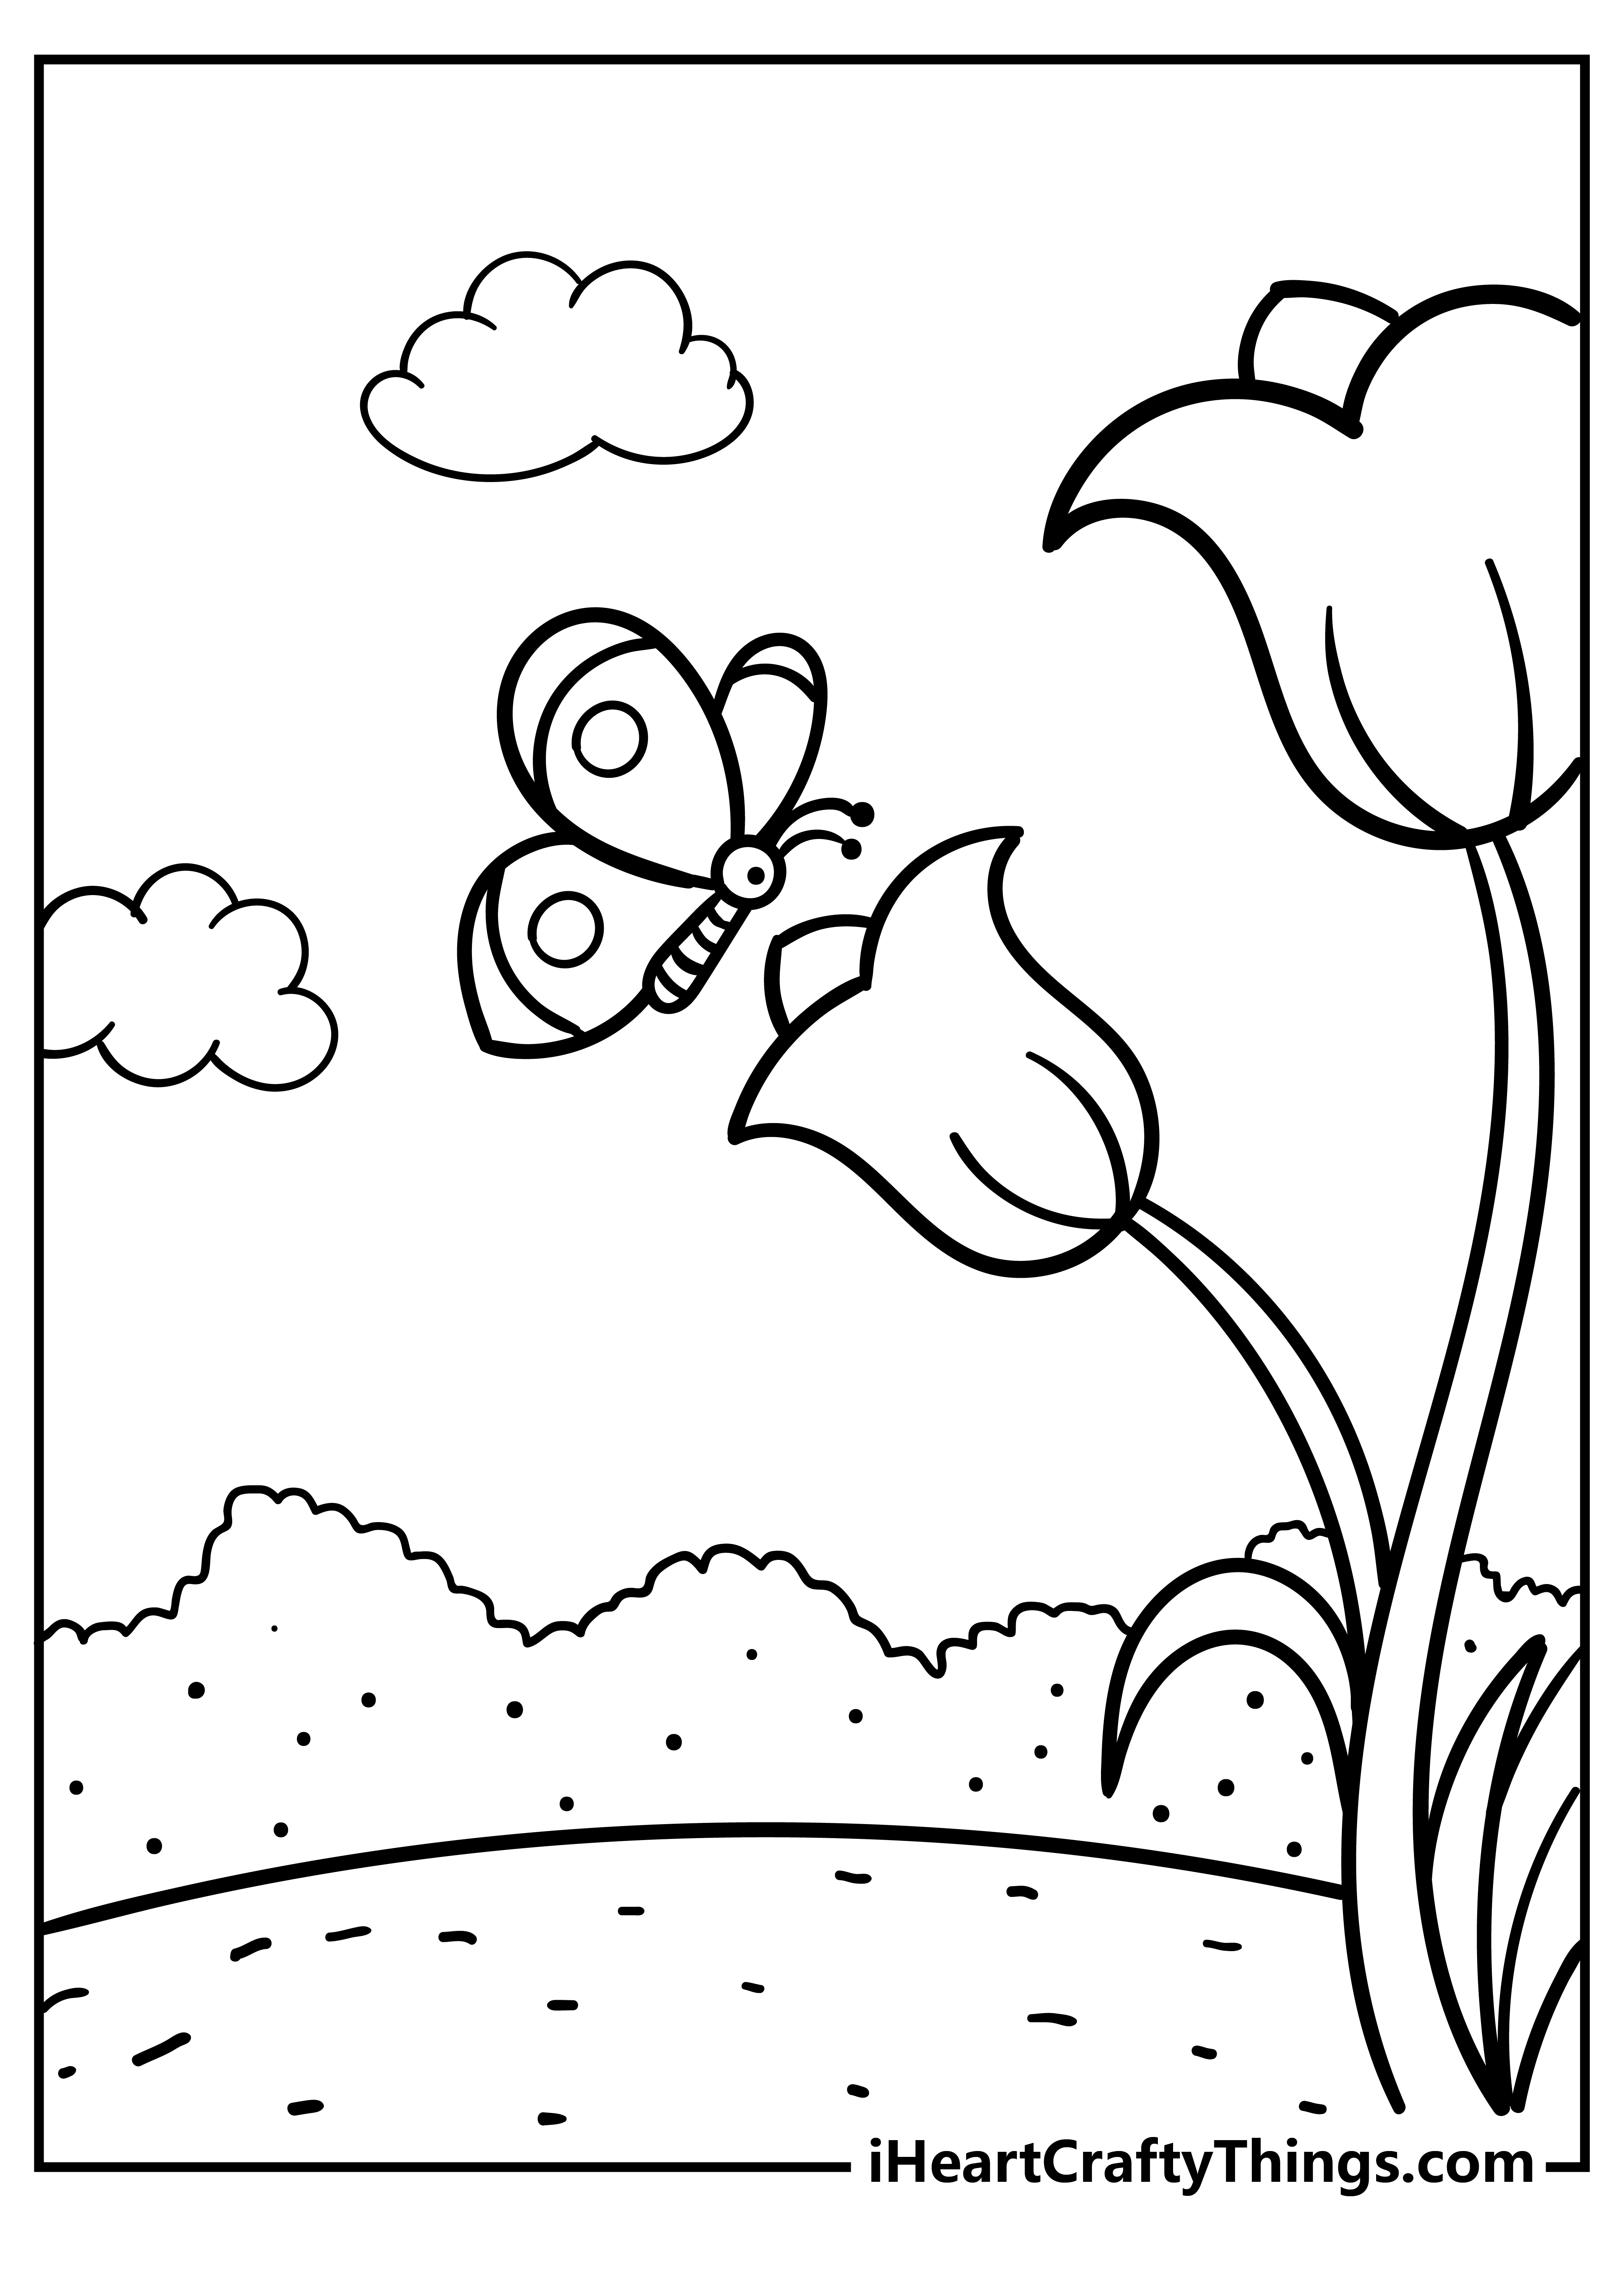 Nature Coloring Book for adults free download